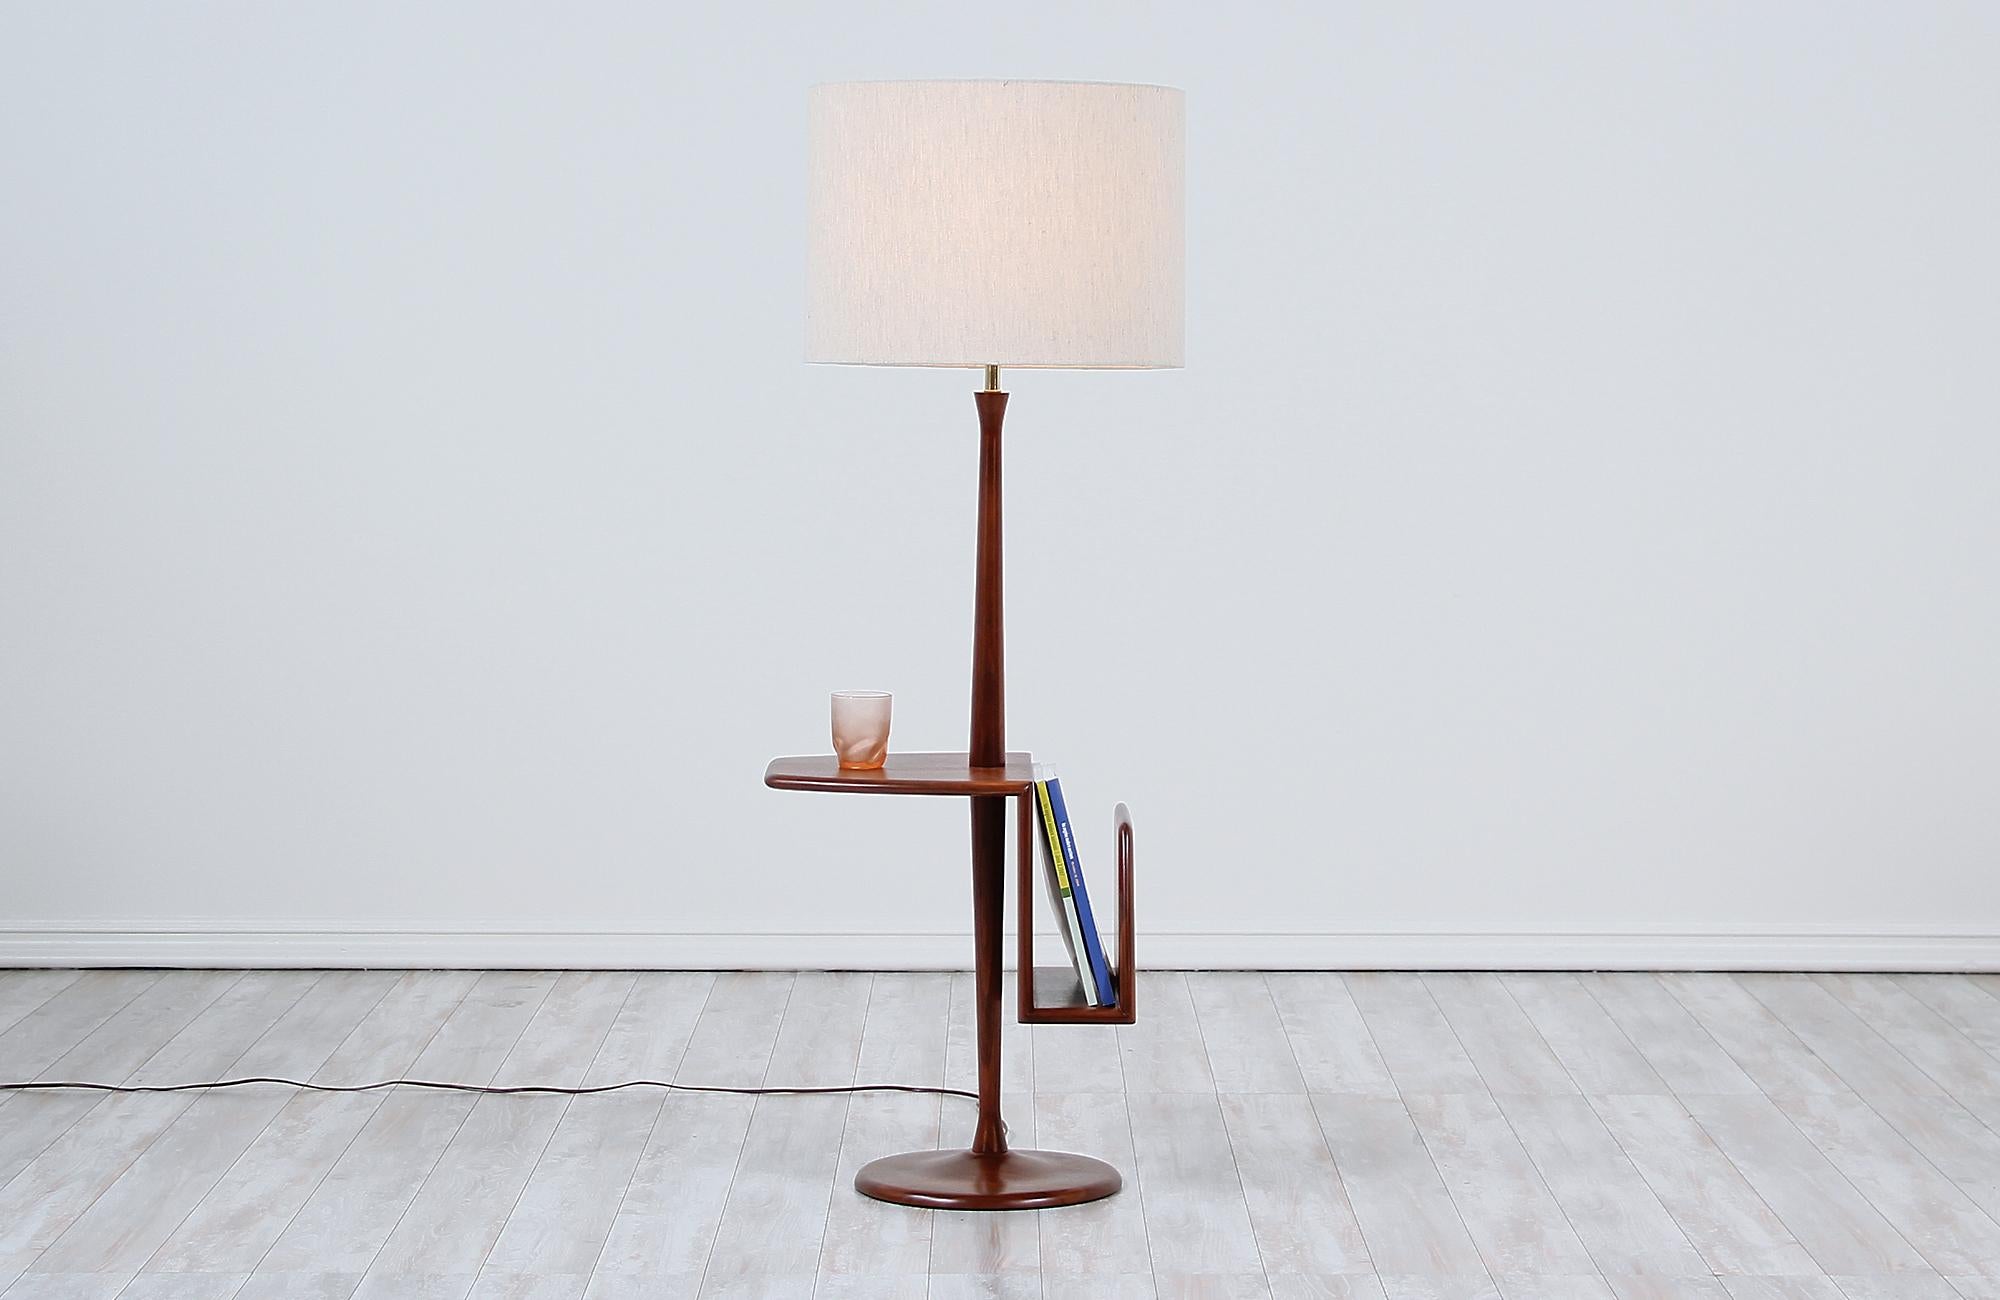 Vintage modern floor lamp designed and manufactured by Laurel Lamp Co. in the United States circa 1960s. This beautiful Mid-Century Modern lamp features a tall and solid walnut wood frame with stunning grain detail throughout adding a warm flair to